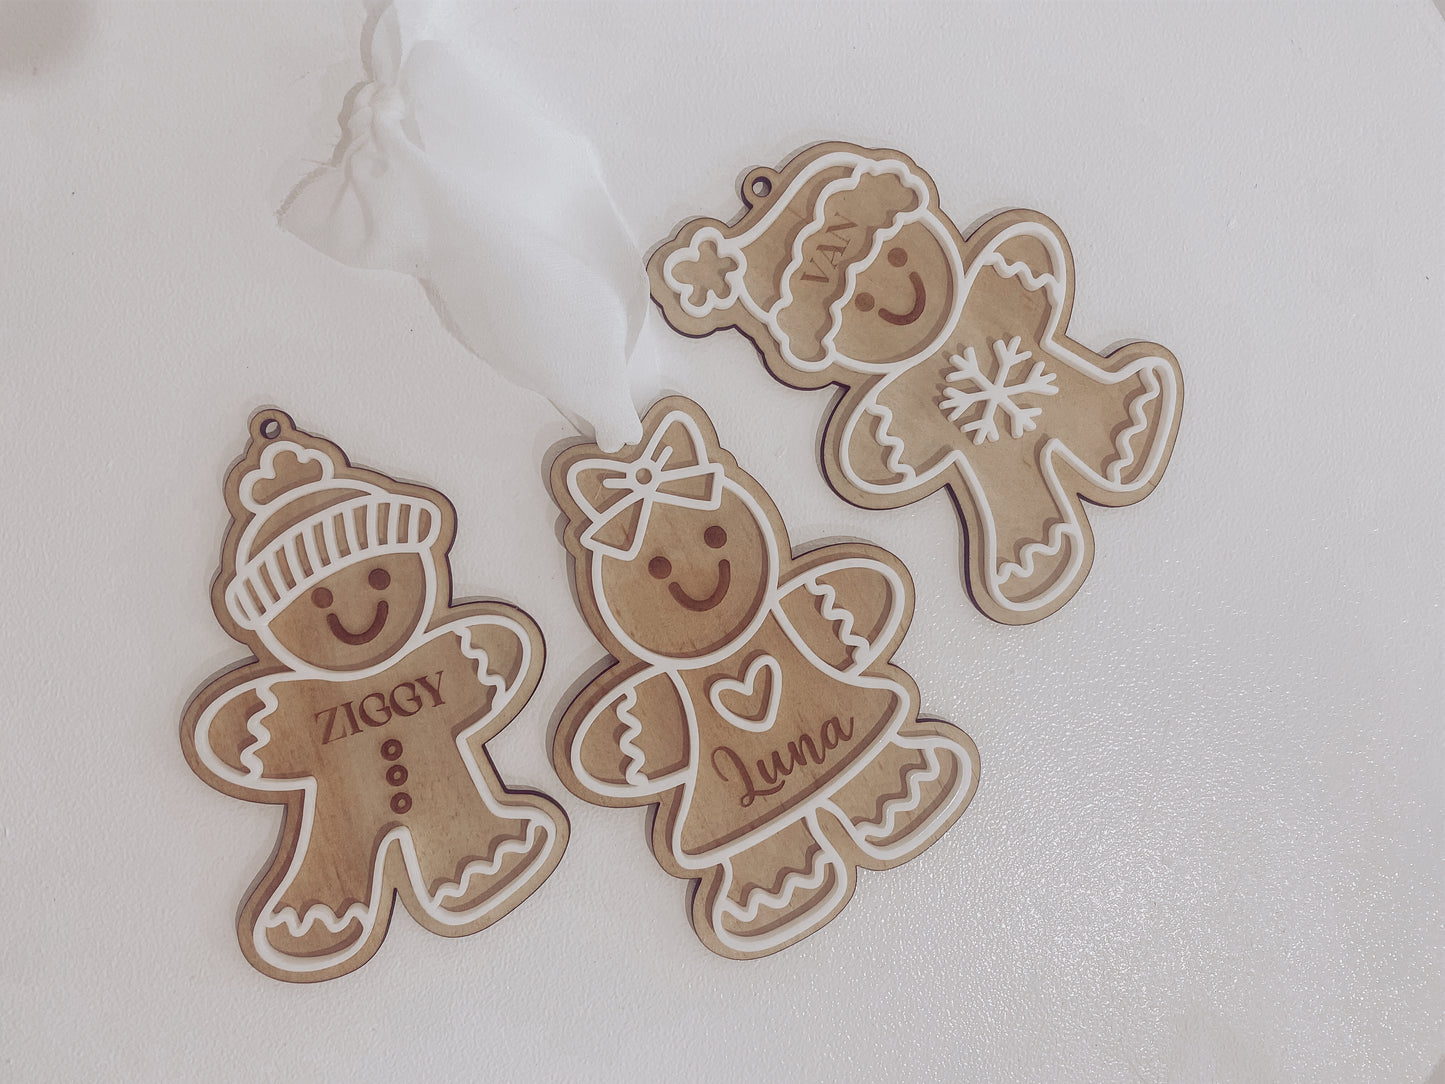 Personalised Gingerbread Christmas Ornament